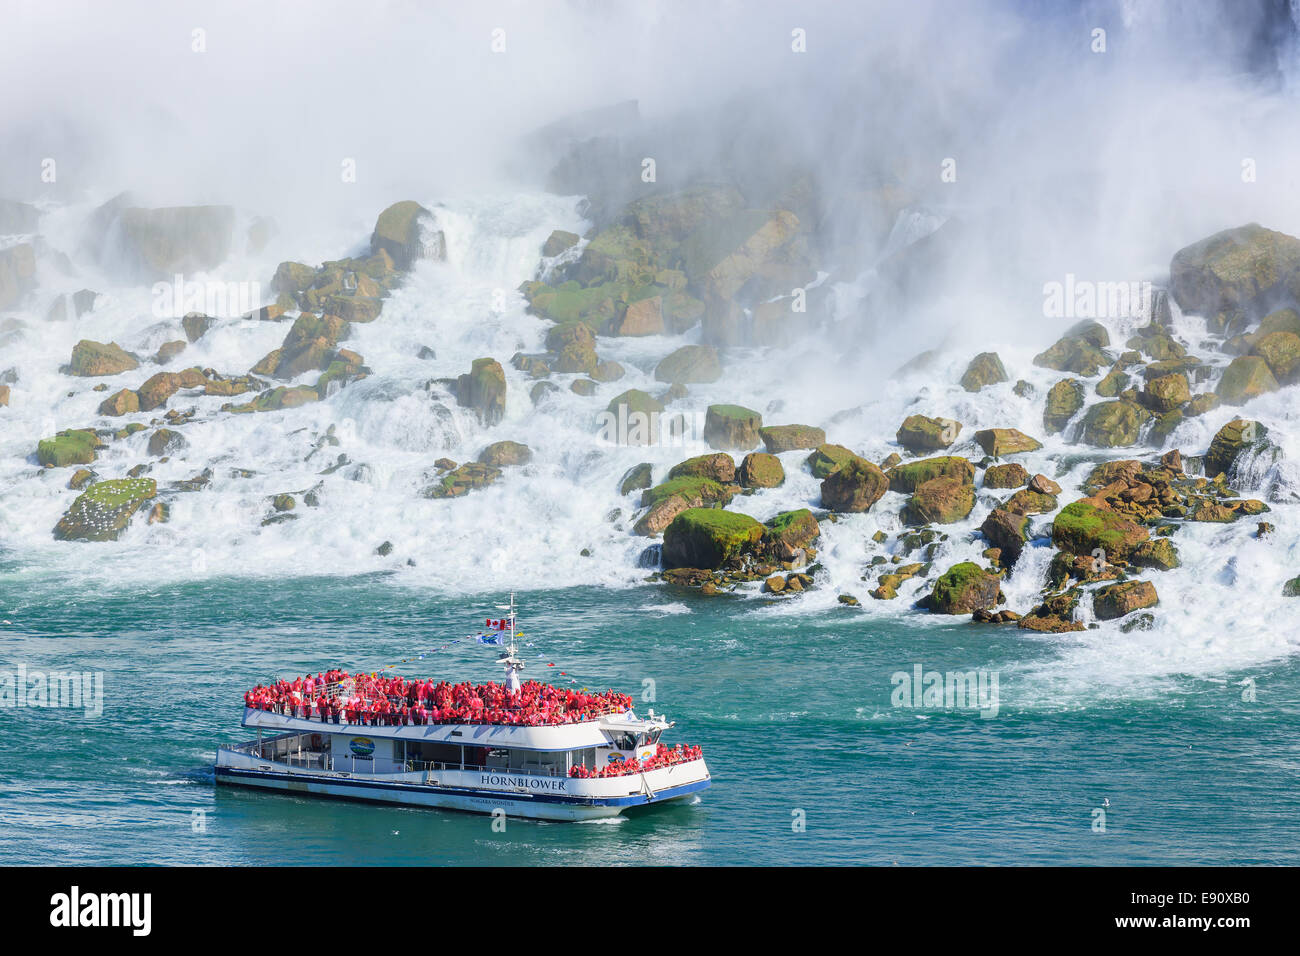 The Hornblower loaded with tourists in front of the American Falls, part of the Niagara Falls, Ontario, Canada. Stock Photo